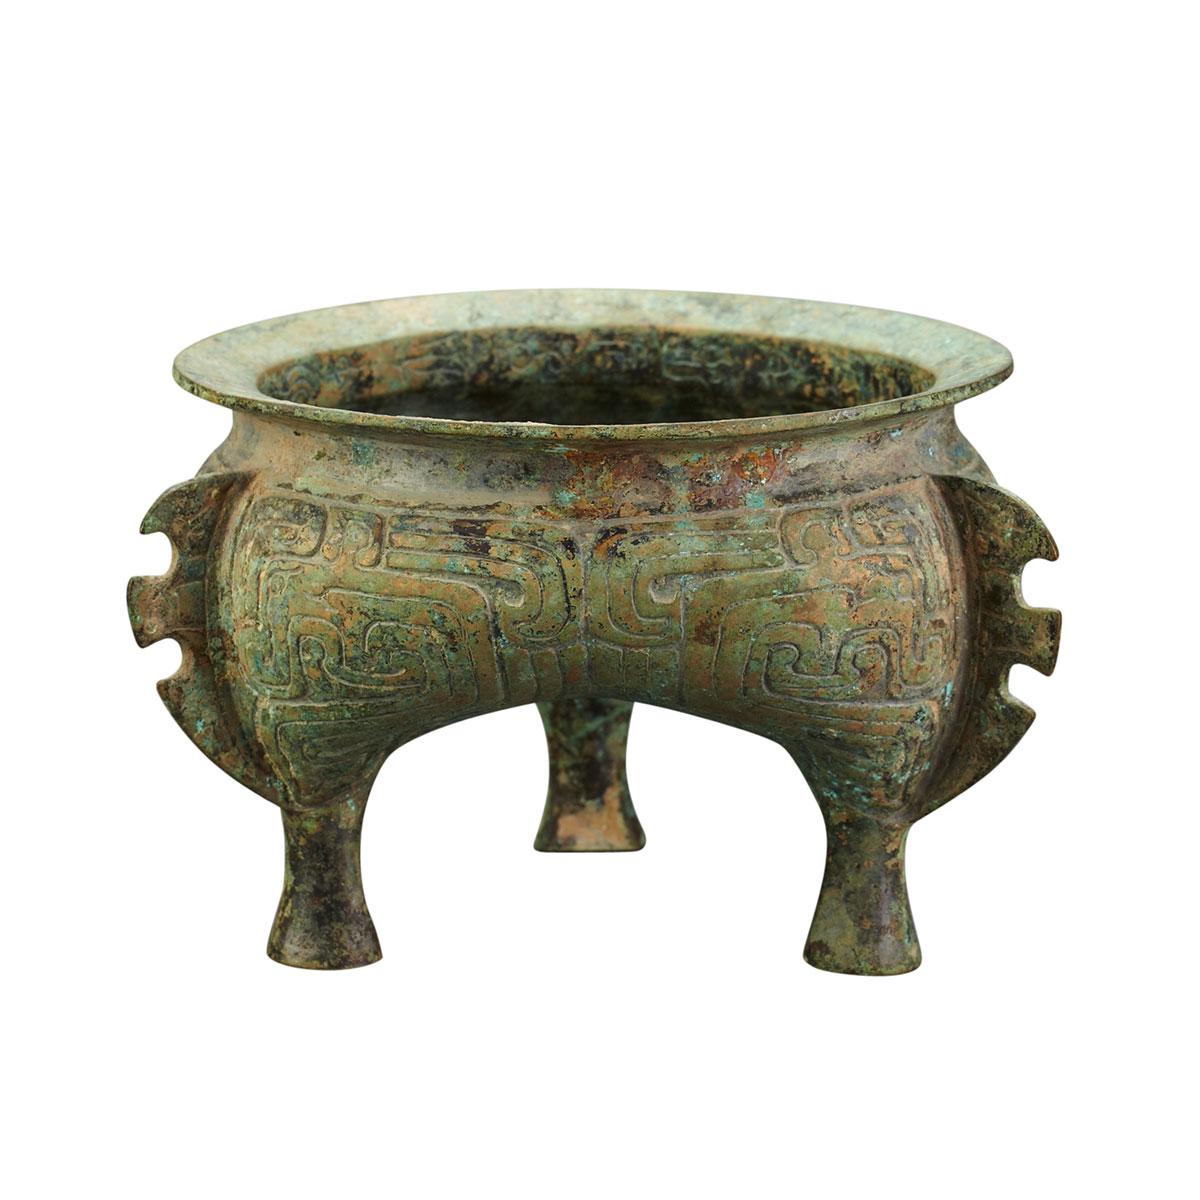 Bronze Ritual Food Vessel, Ding, Possibly Shang Dynasty